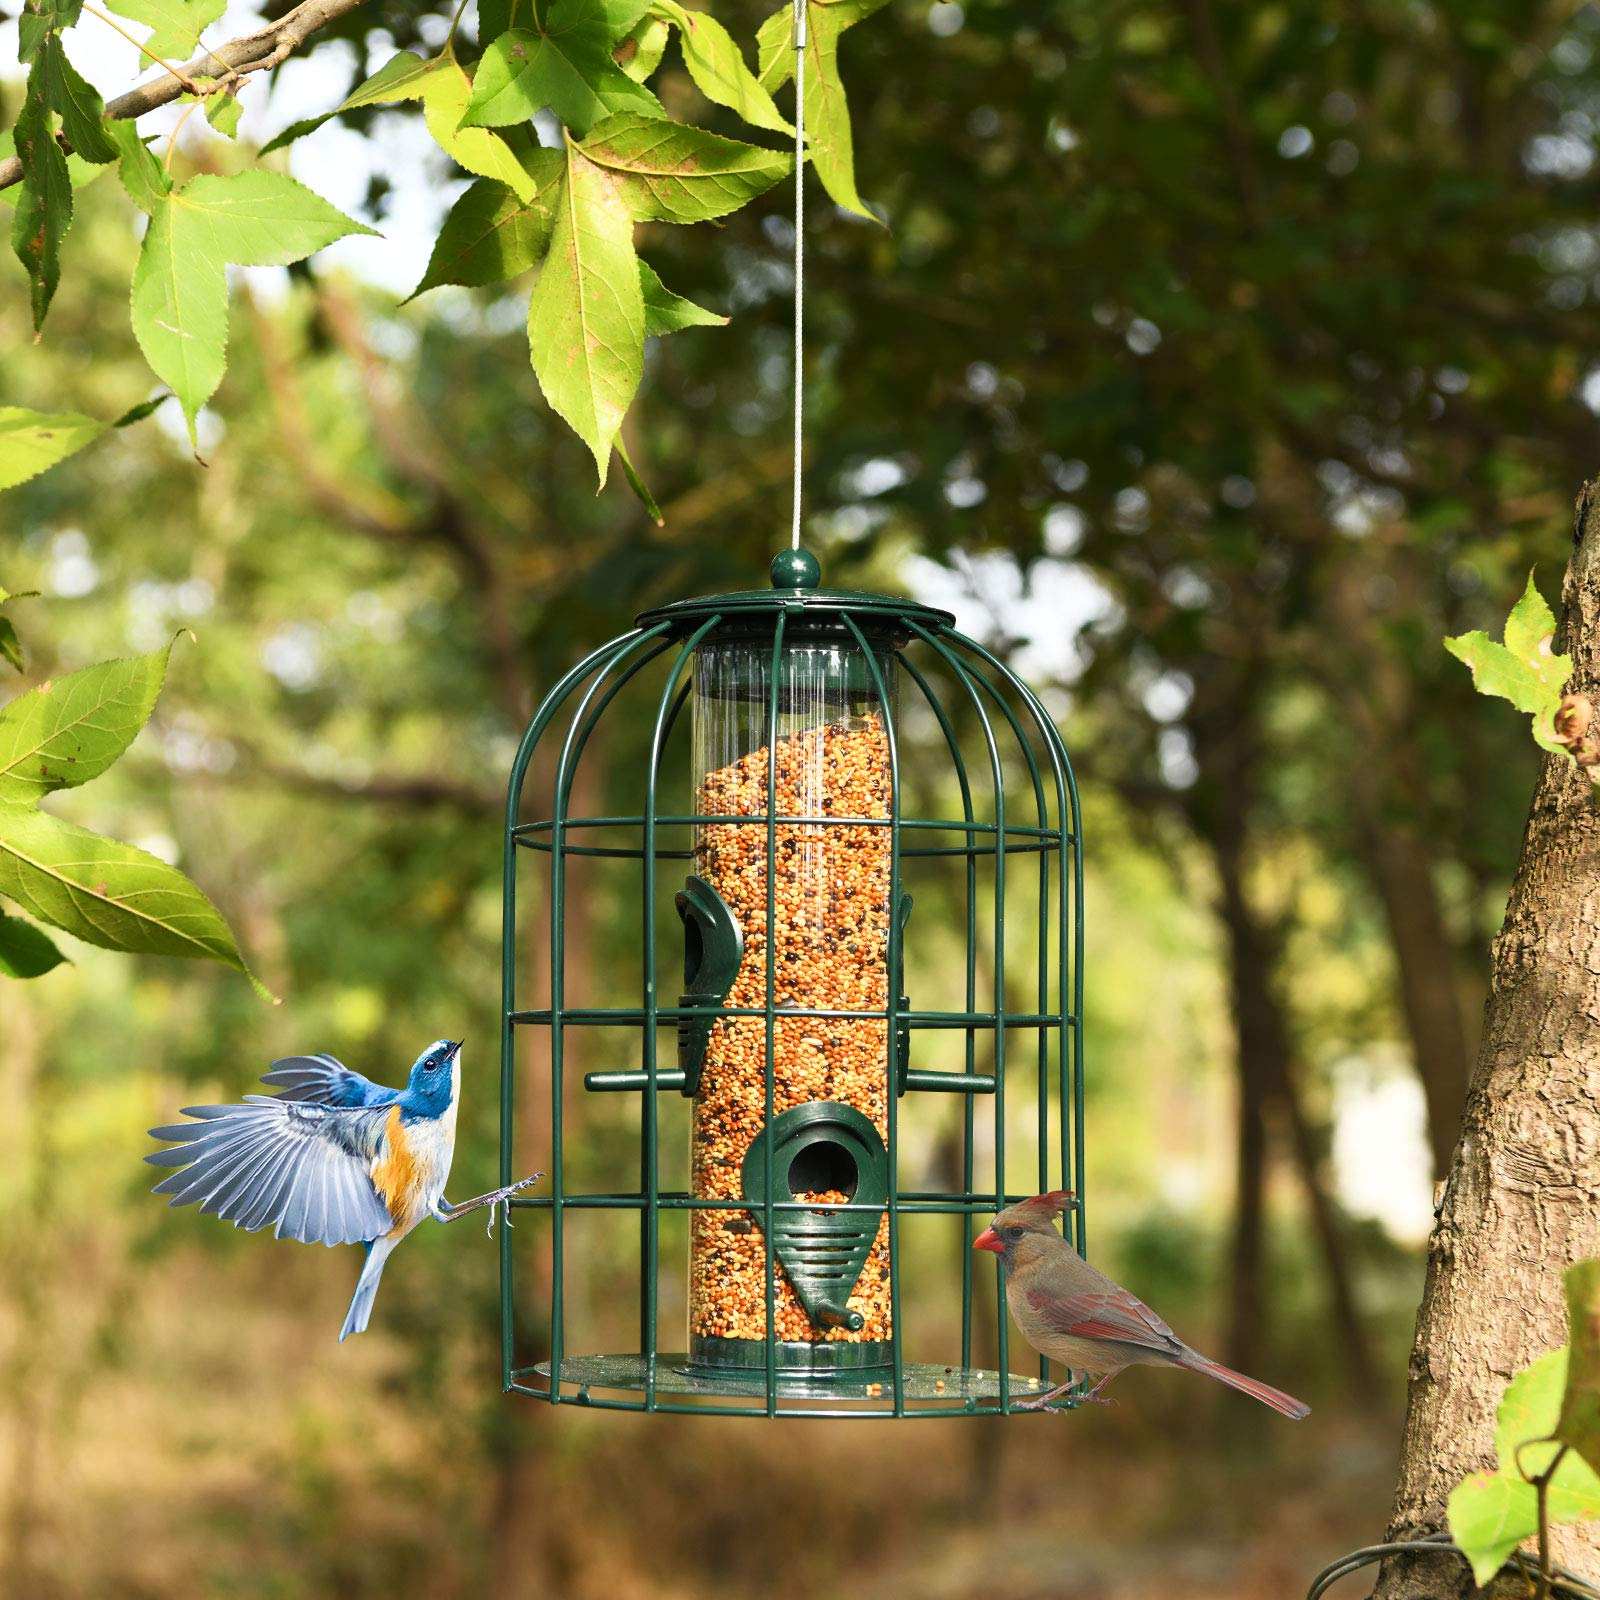 Giantex Metal Hanging Bird Feeder, Outdoor Squirrel-Proof Bird Feeder Cage with 4 Feeding Ports, Transparent PC Tube